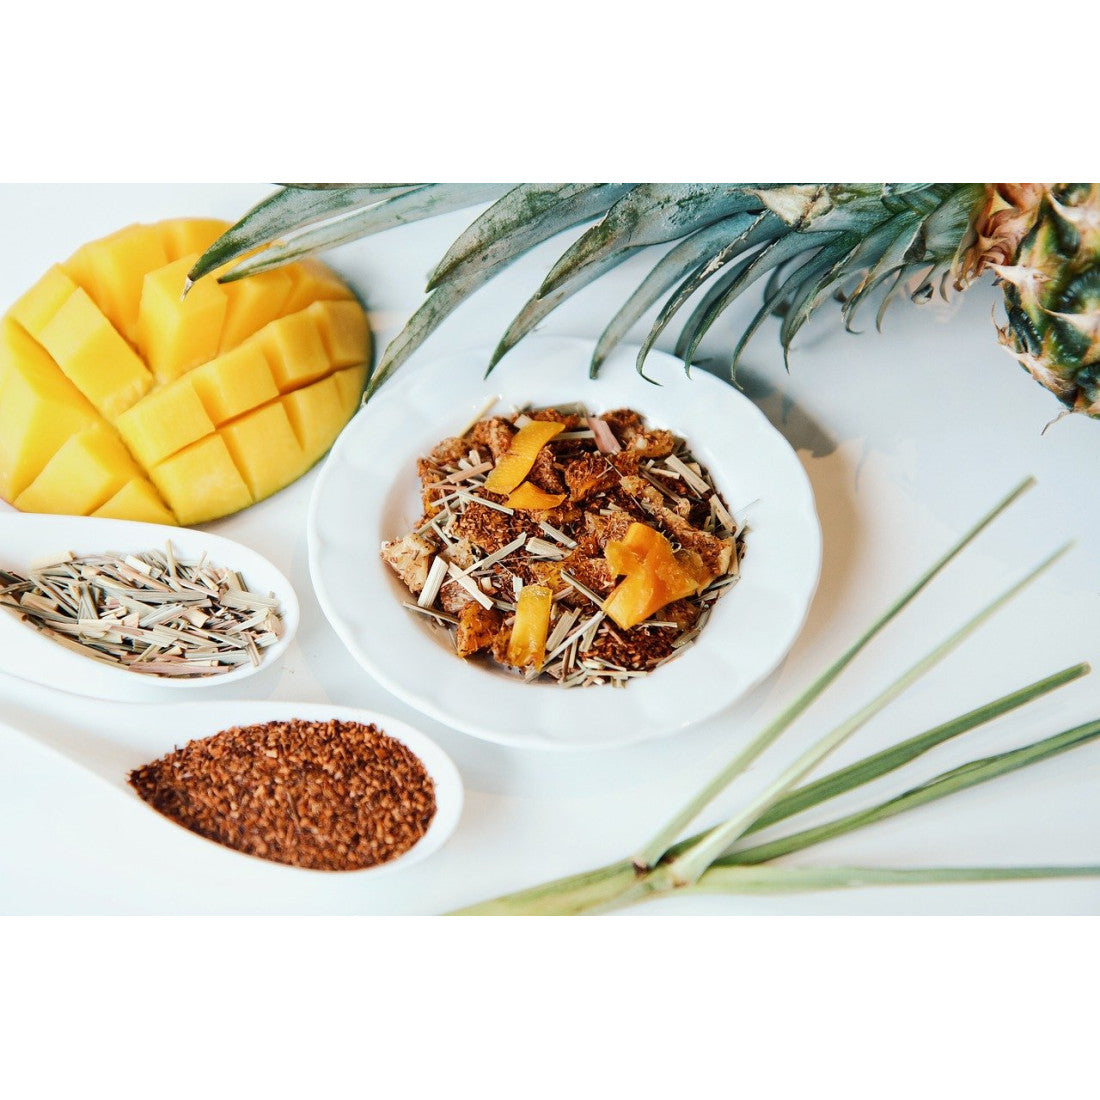 A photo of small plates of ingredients used in our tea blend with the top leves of a pineapple and a decoratively cut mango in the background.